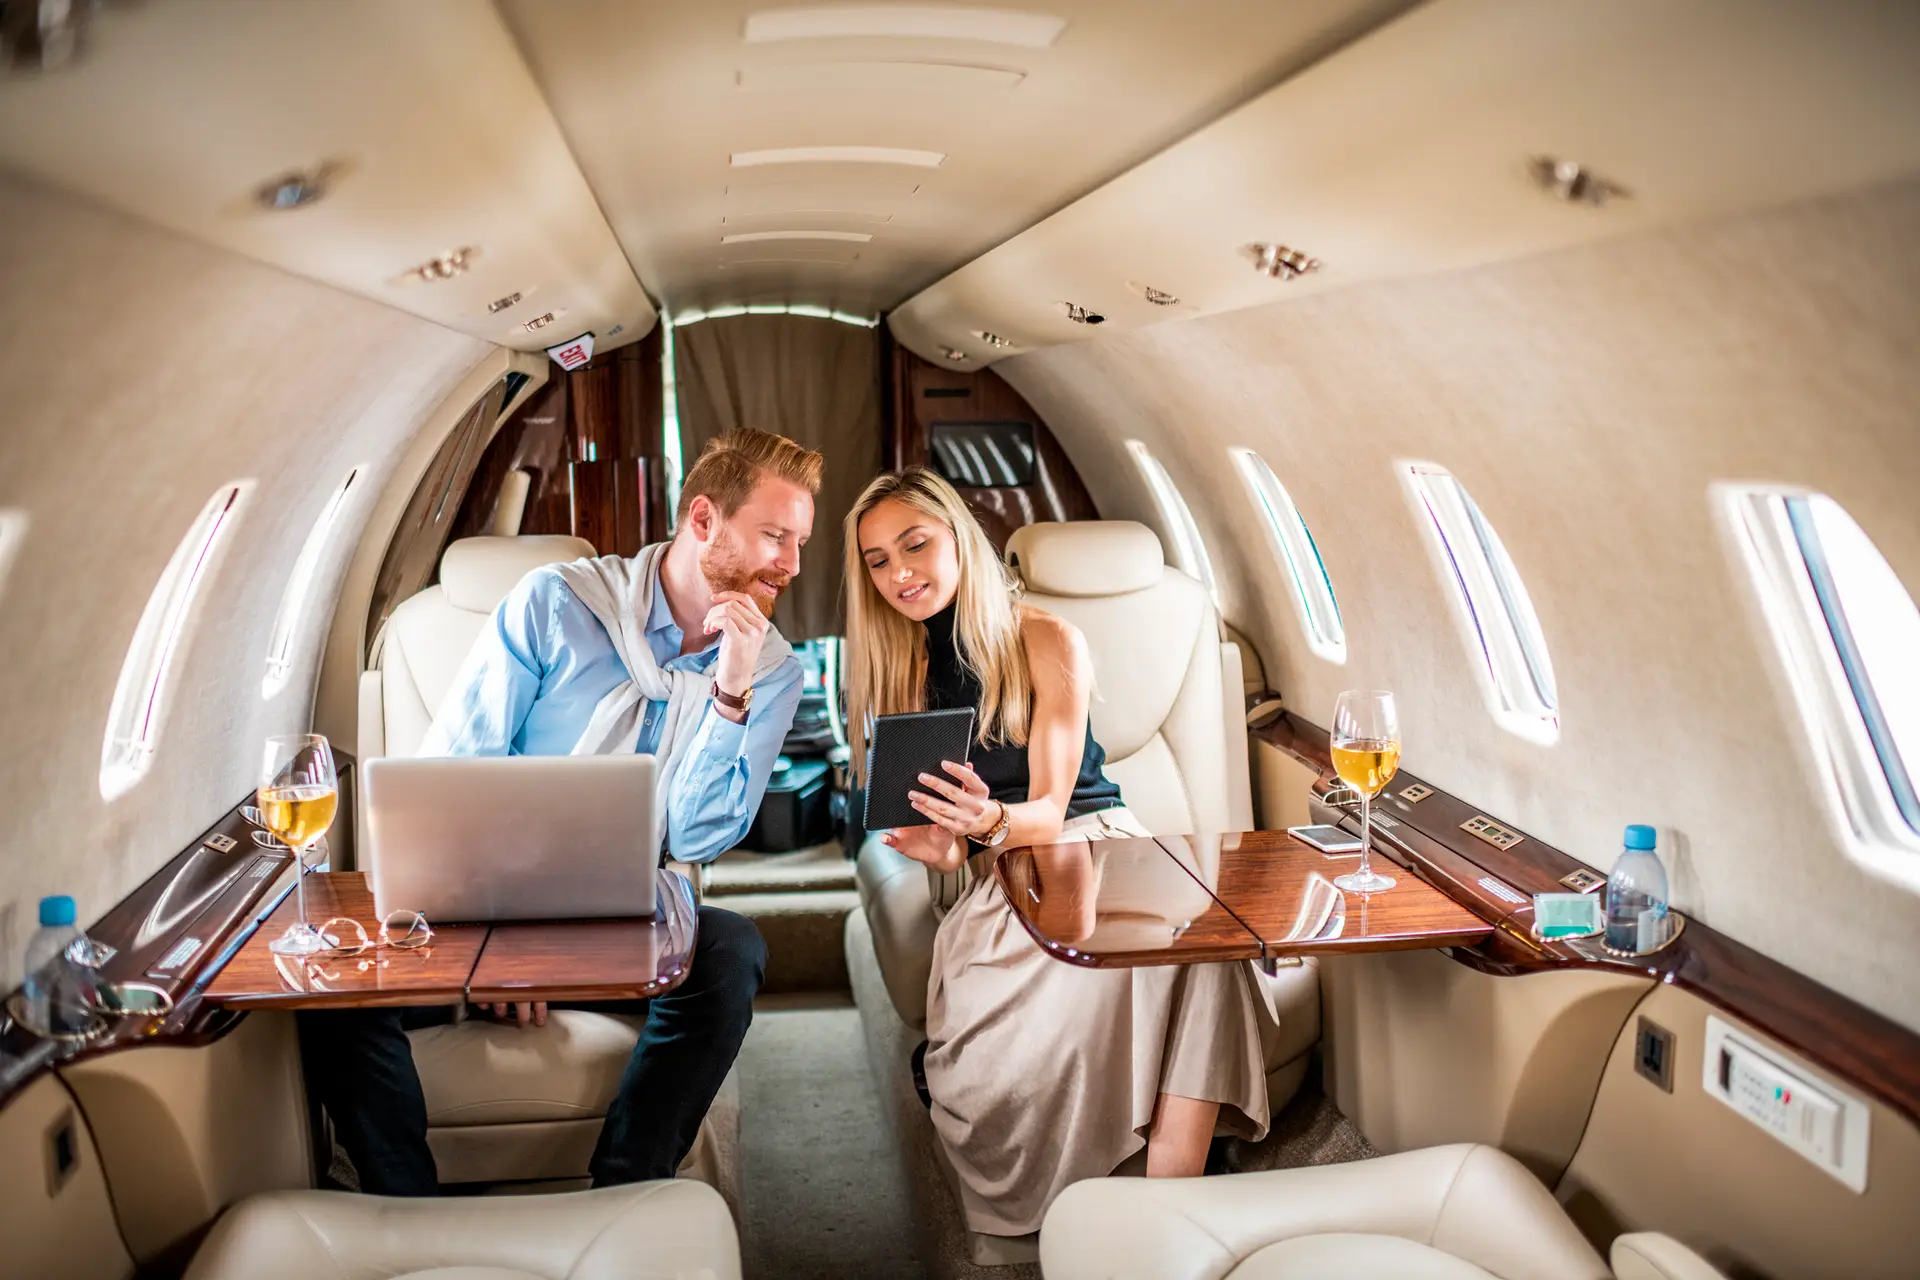 Young rich couple working together while sitting in a private airplane. There is a laptop on the table in front of the man. They are looking at a digital tablet held by a woman.